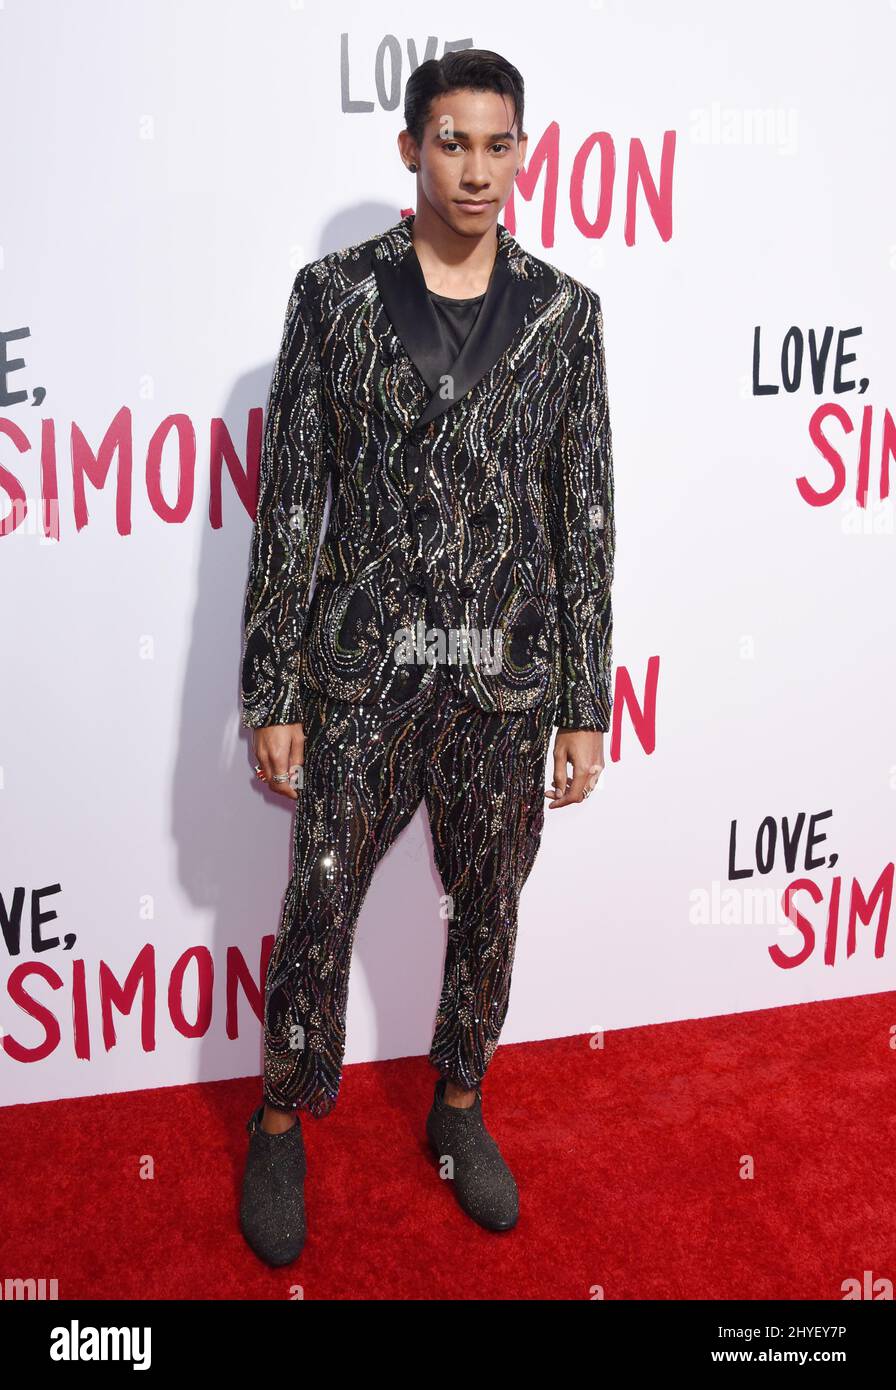 Love, simon and lonsdale hi-res stock photography and images - Alamy